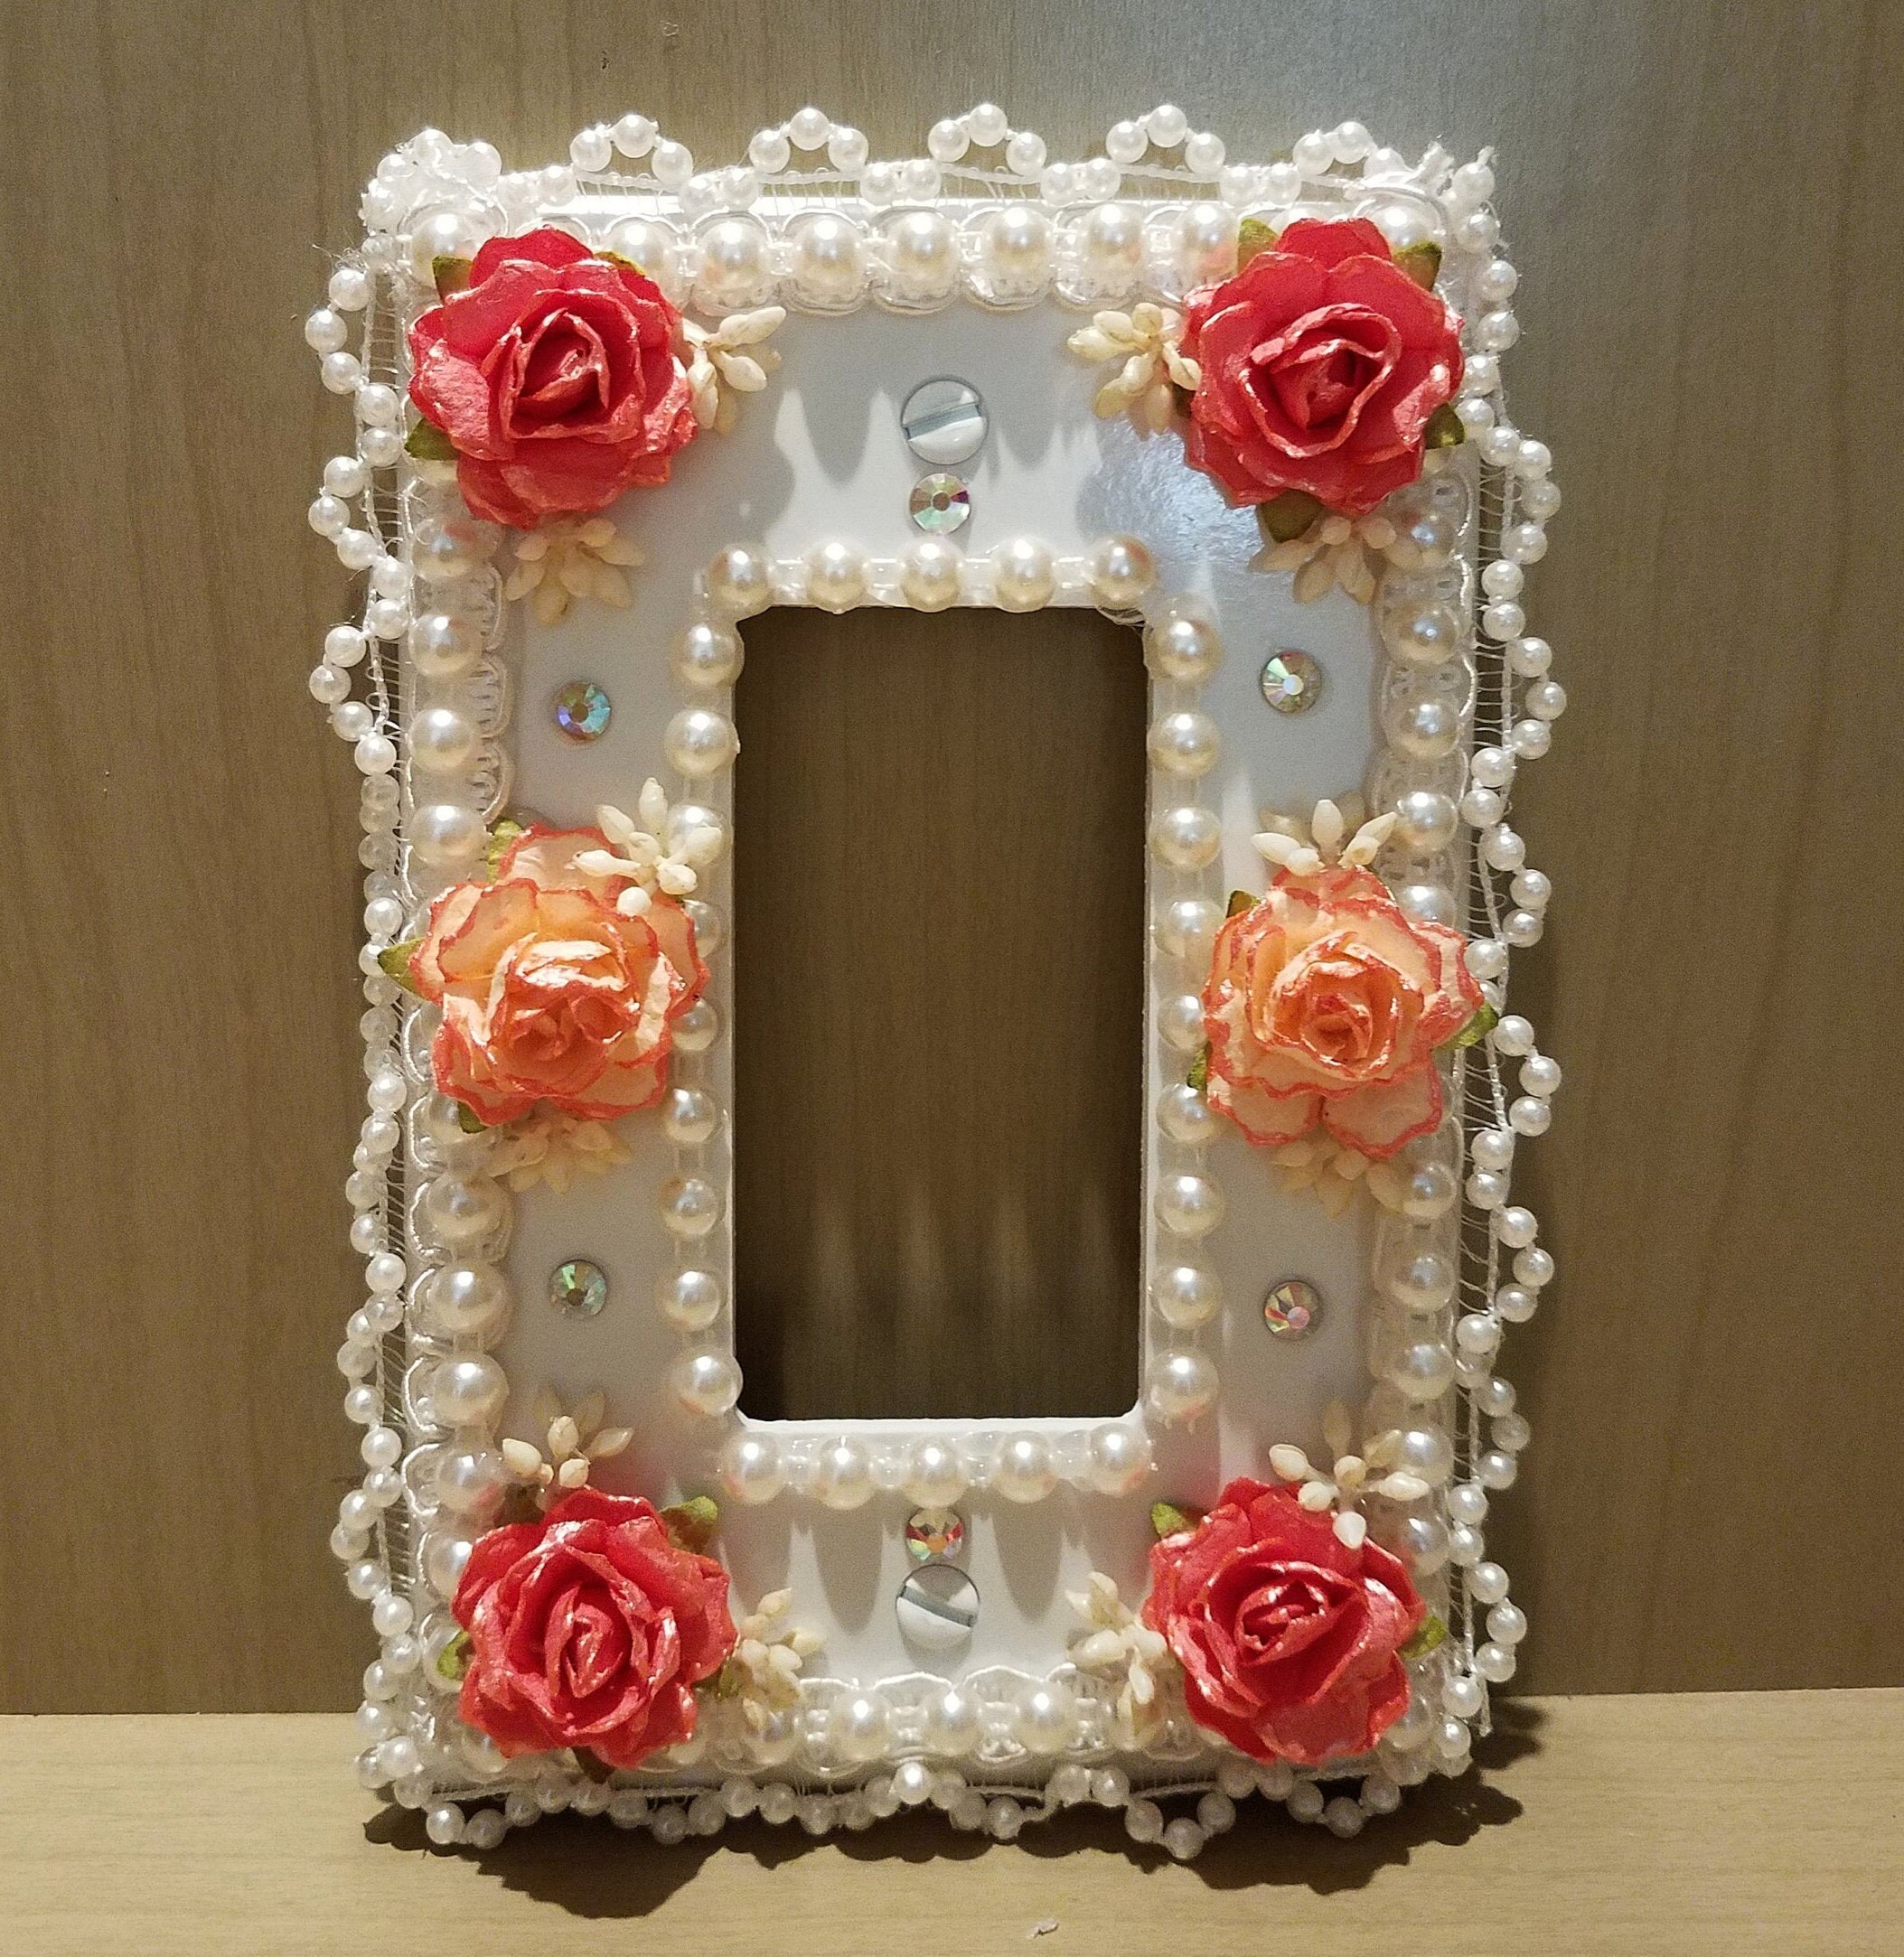 Shabby Chic Light Switch Plate With Peach and Coral Roses | Etsy